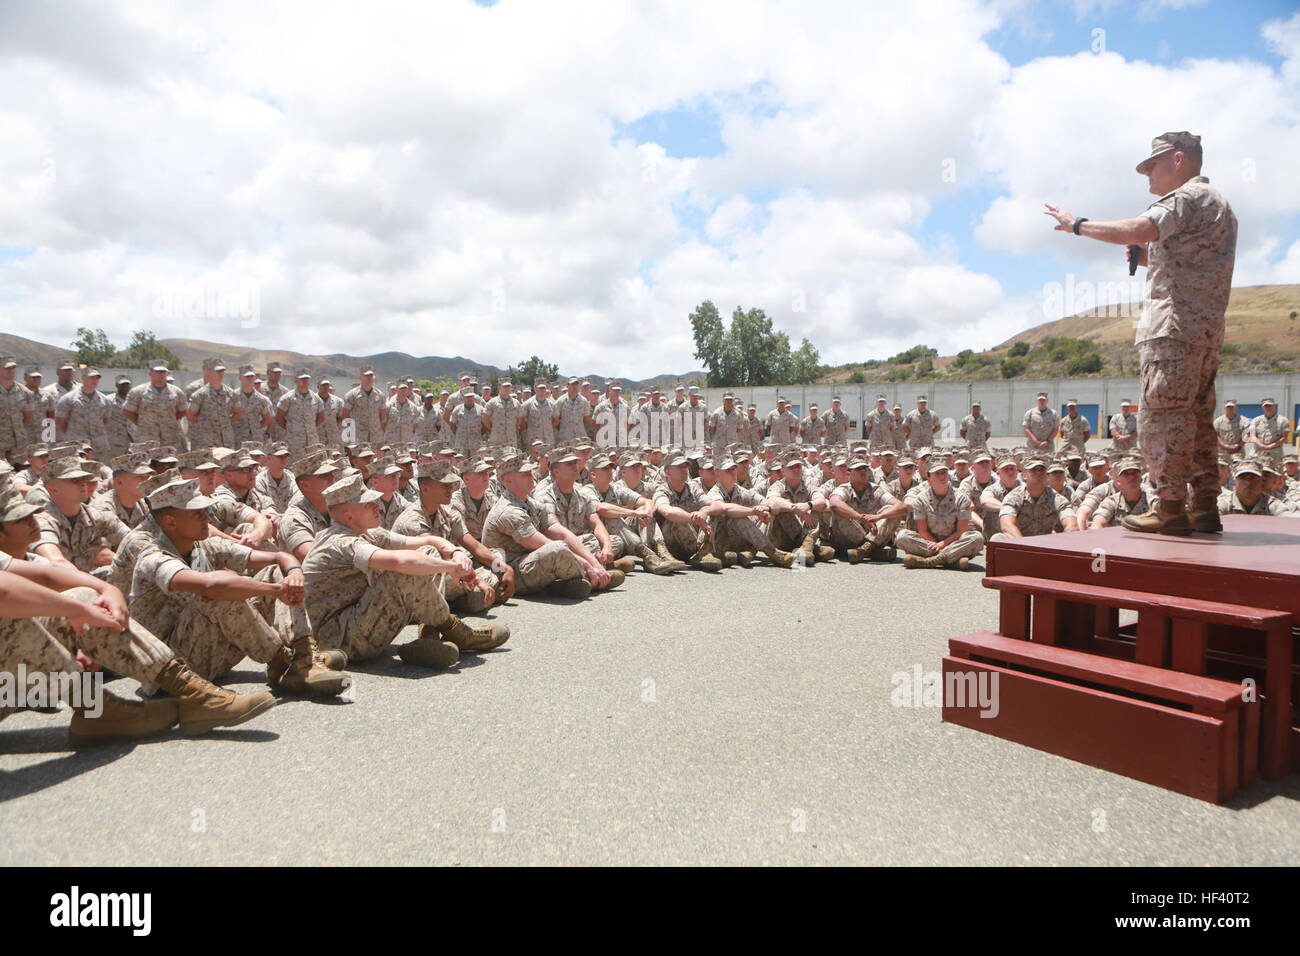 U.S. Marine Corps Gen. Robert Neller, Commandant of the Marine Corps, talks to Marines of 1st Maintenance Battalion, Combat Logistics Regiment 15, 1st Marine Logistics Group on Camp Pendleton, Calif., May 24, 2016. Gen. Neller addressed the future of the Marine Corps and answered questions from the Marines. (U.S. Marine Corps photo by Sgt. Rodion Zabolotniy, Combat Camera, Camp Pendleton/RELEASED) Commandant of the Marine Corps Printing the Future (Image 1 of 13) 160524-M-HT768-069 Stock Photo